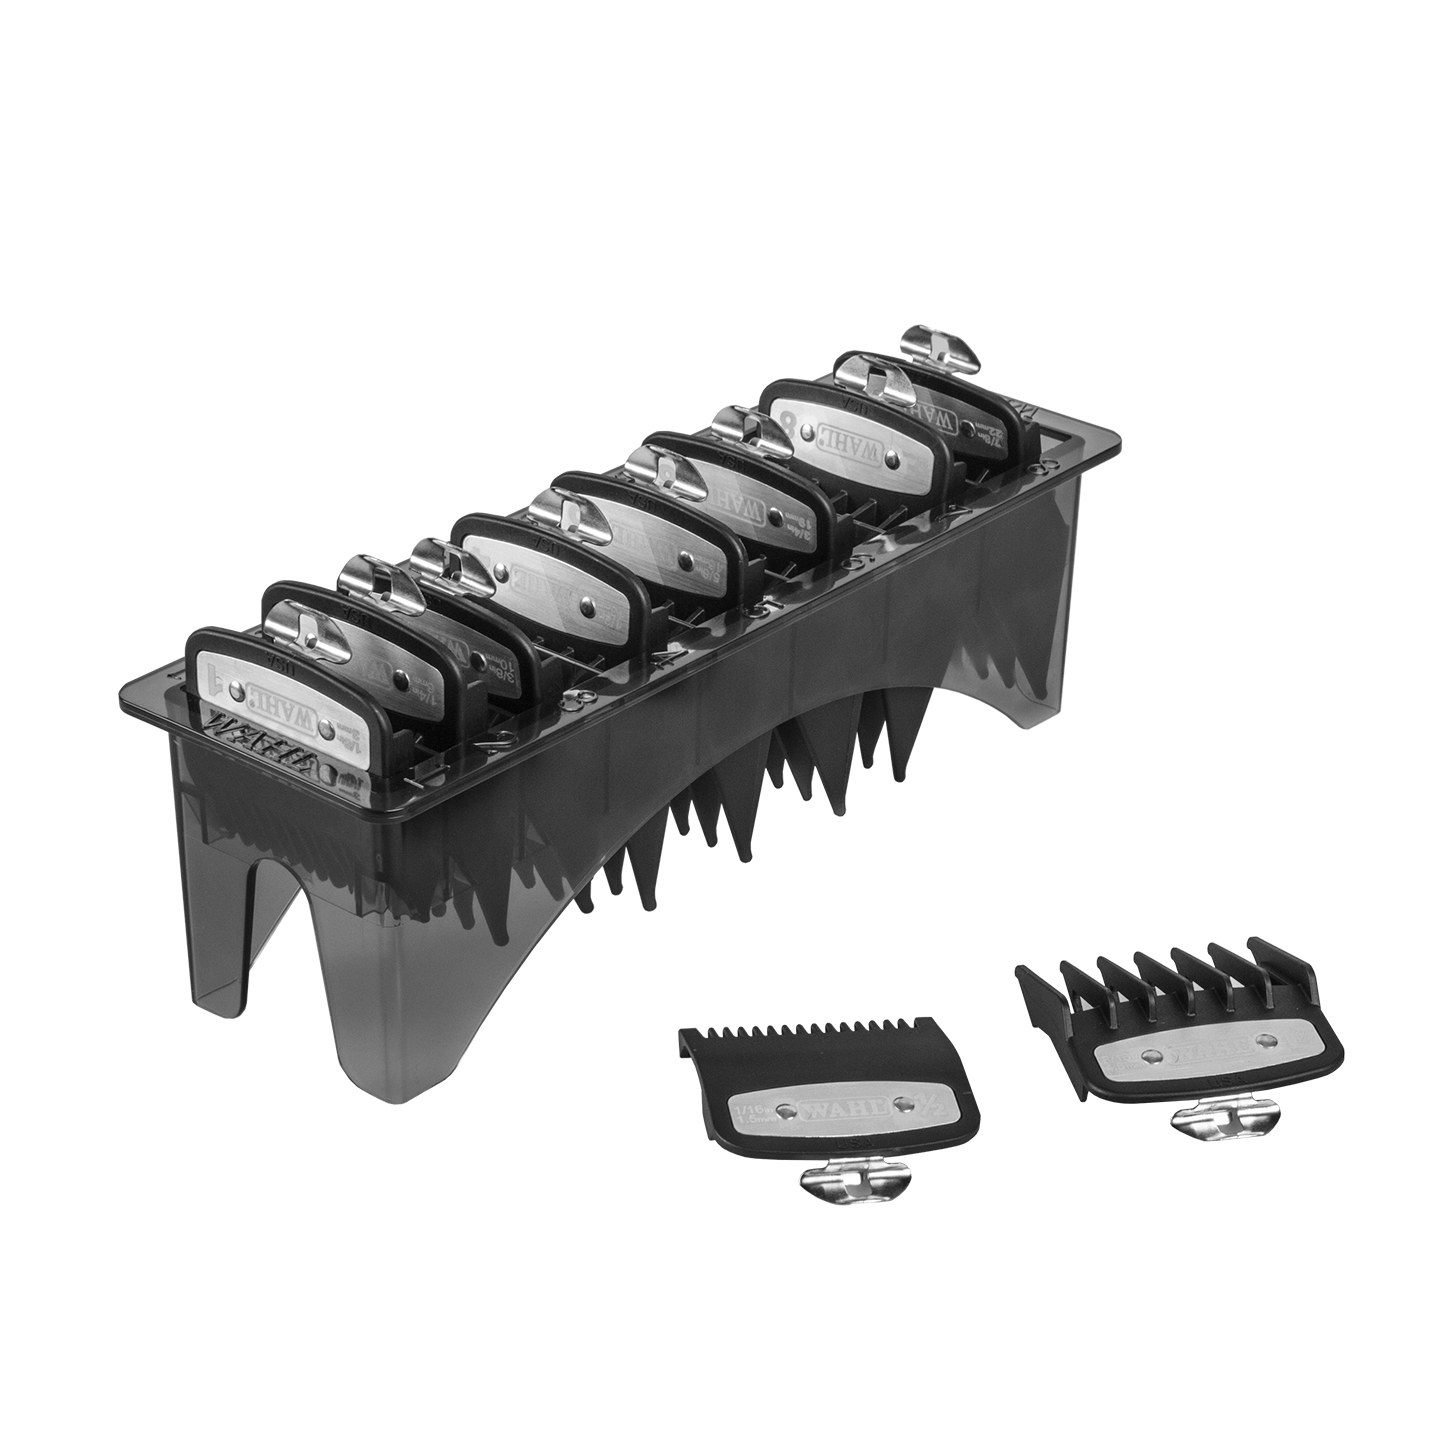 wahl hair clipper comb sizes